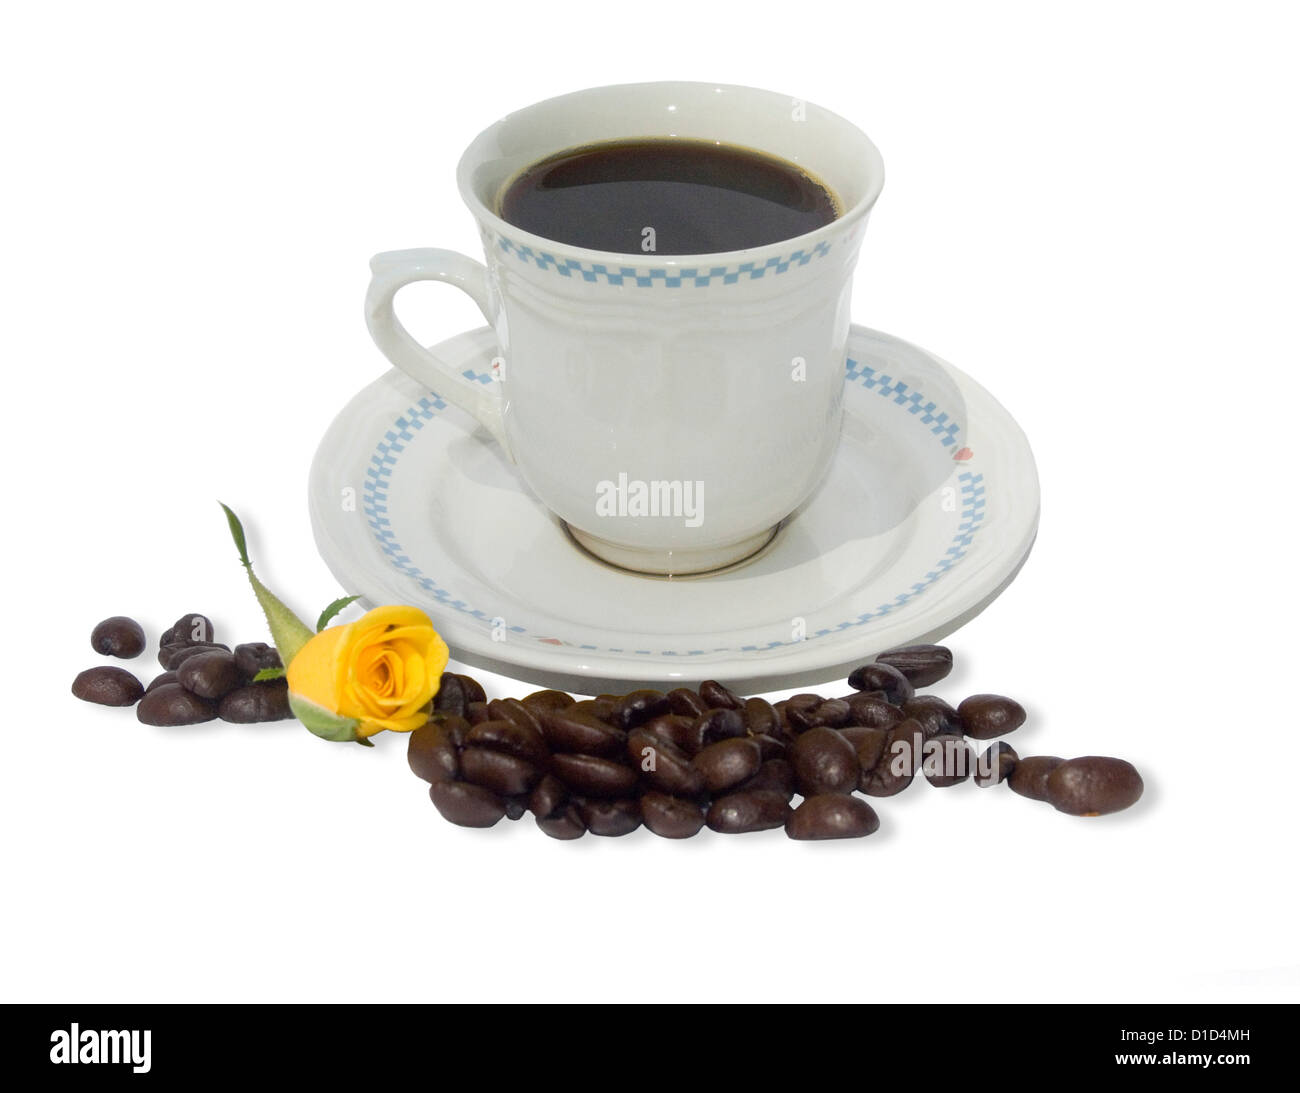 White cup and sauce with coffee in cup and coffee beans scattered around it - on a plain white background Stock Photo